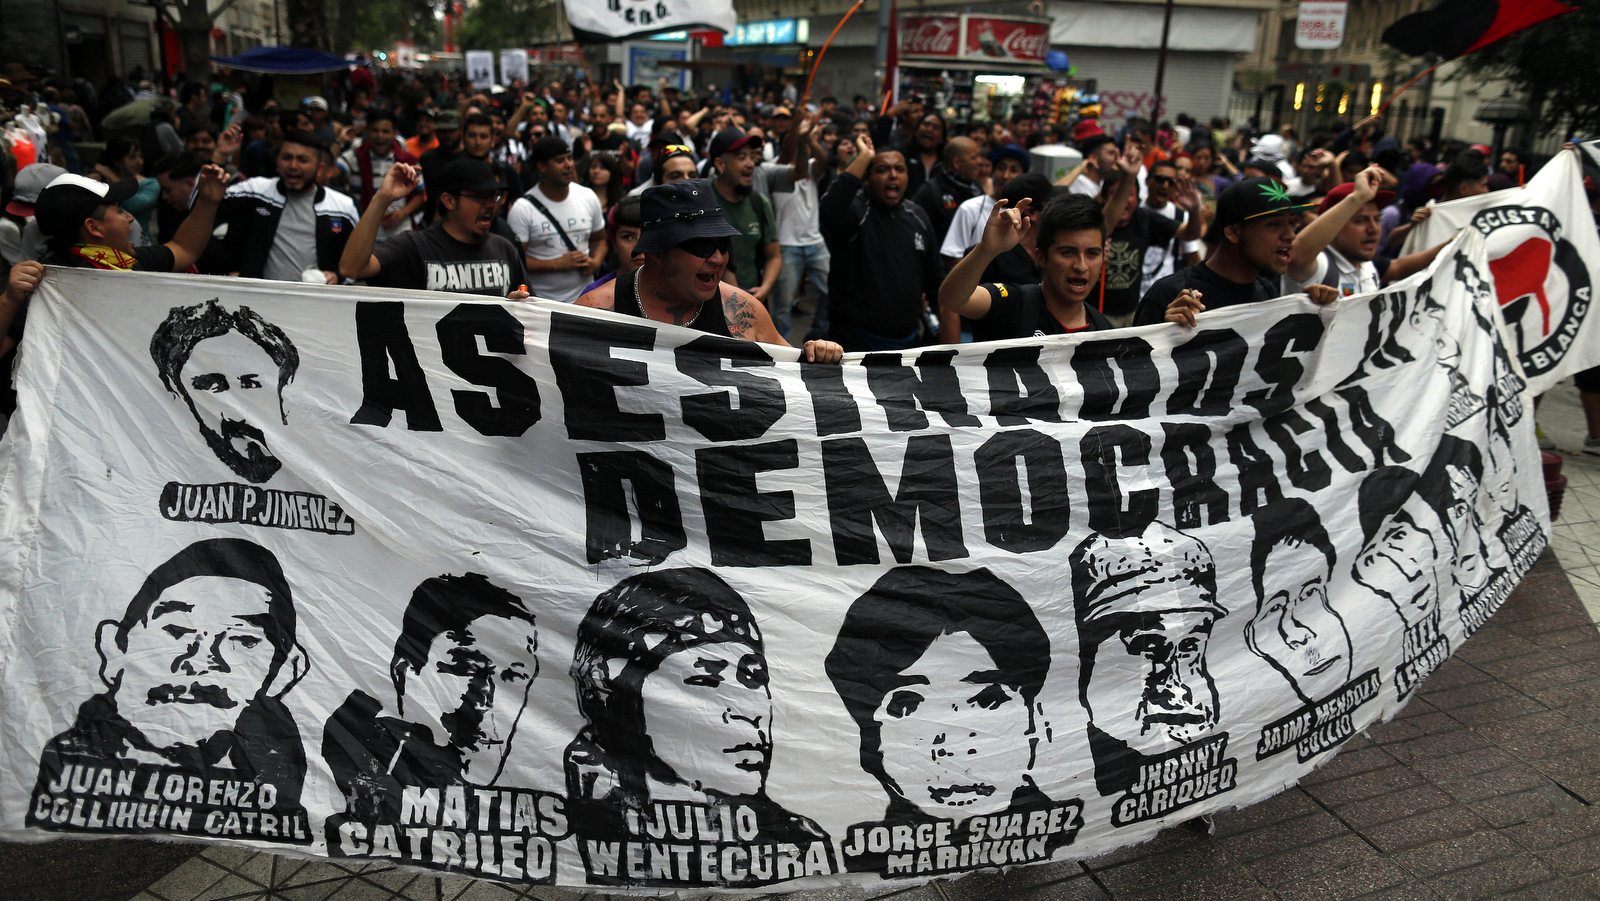 Protesters commemorate the eighth year anniversary of the police killing of Mapuche indigenous activist Matias Catrileo in Santiago, Chile, Jan. 5, 2016, carrying a banner showing the faces of protesters who have died during Chile's democratic governments. (AP/Luis Hidalgo)